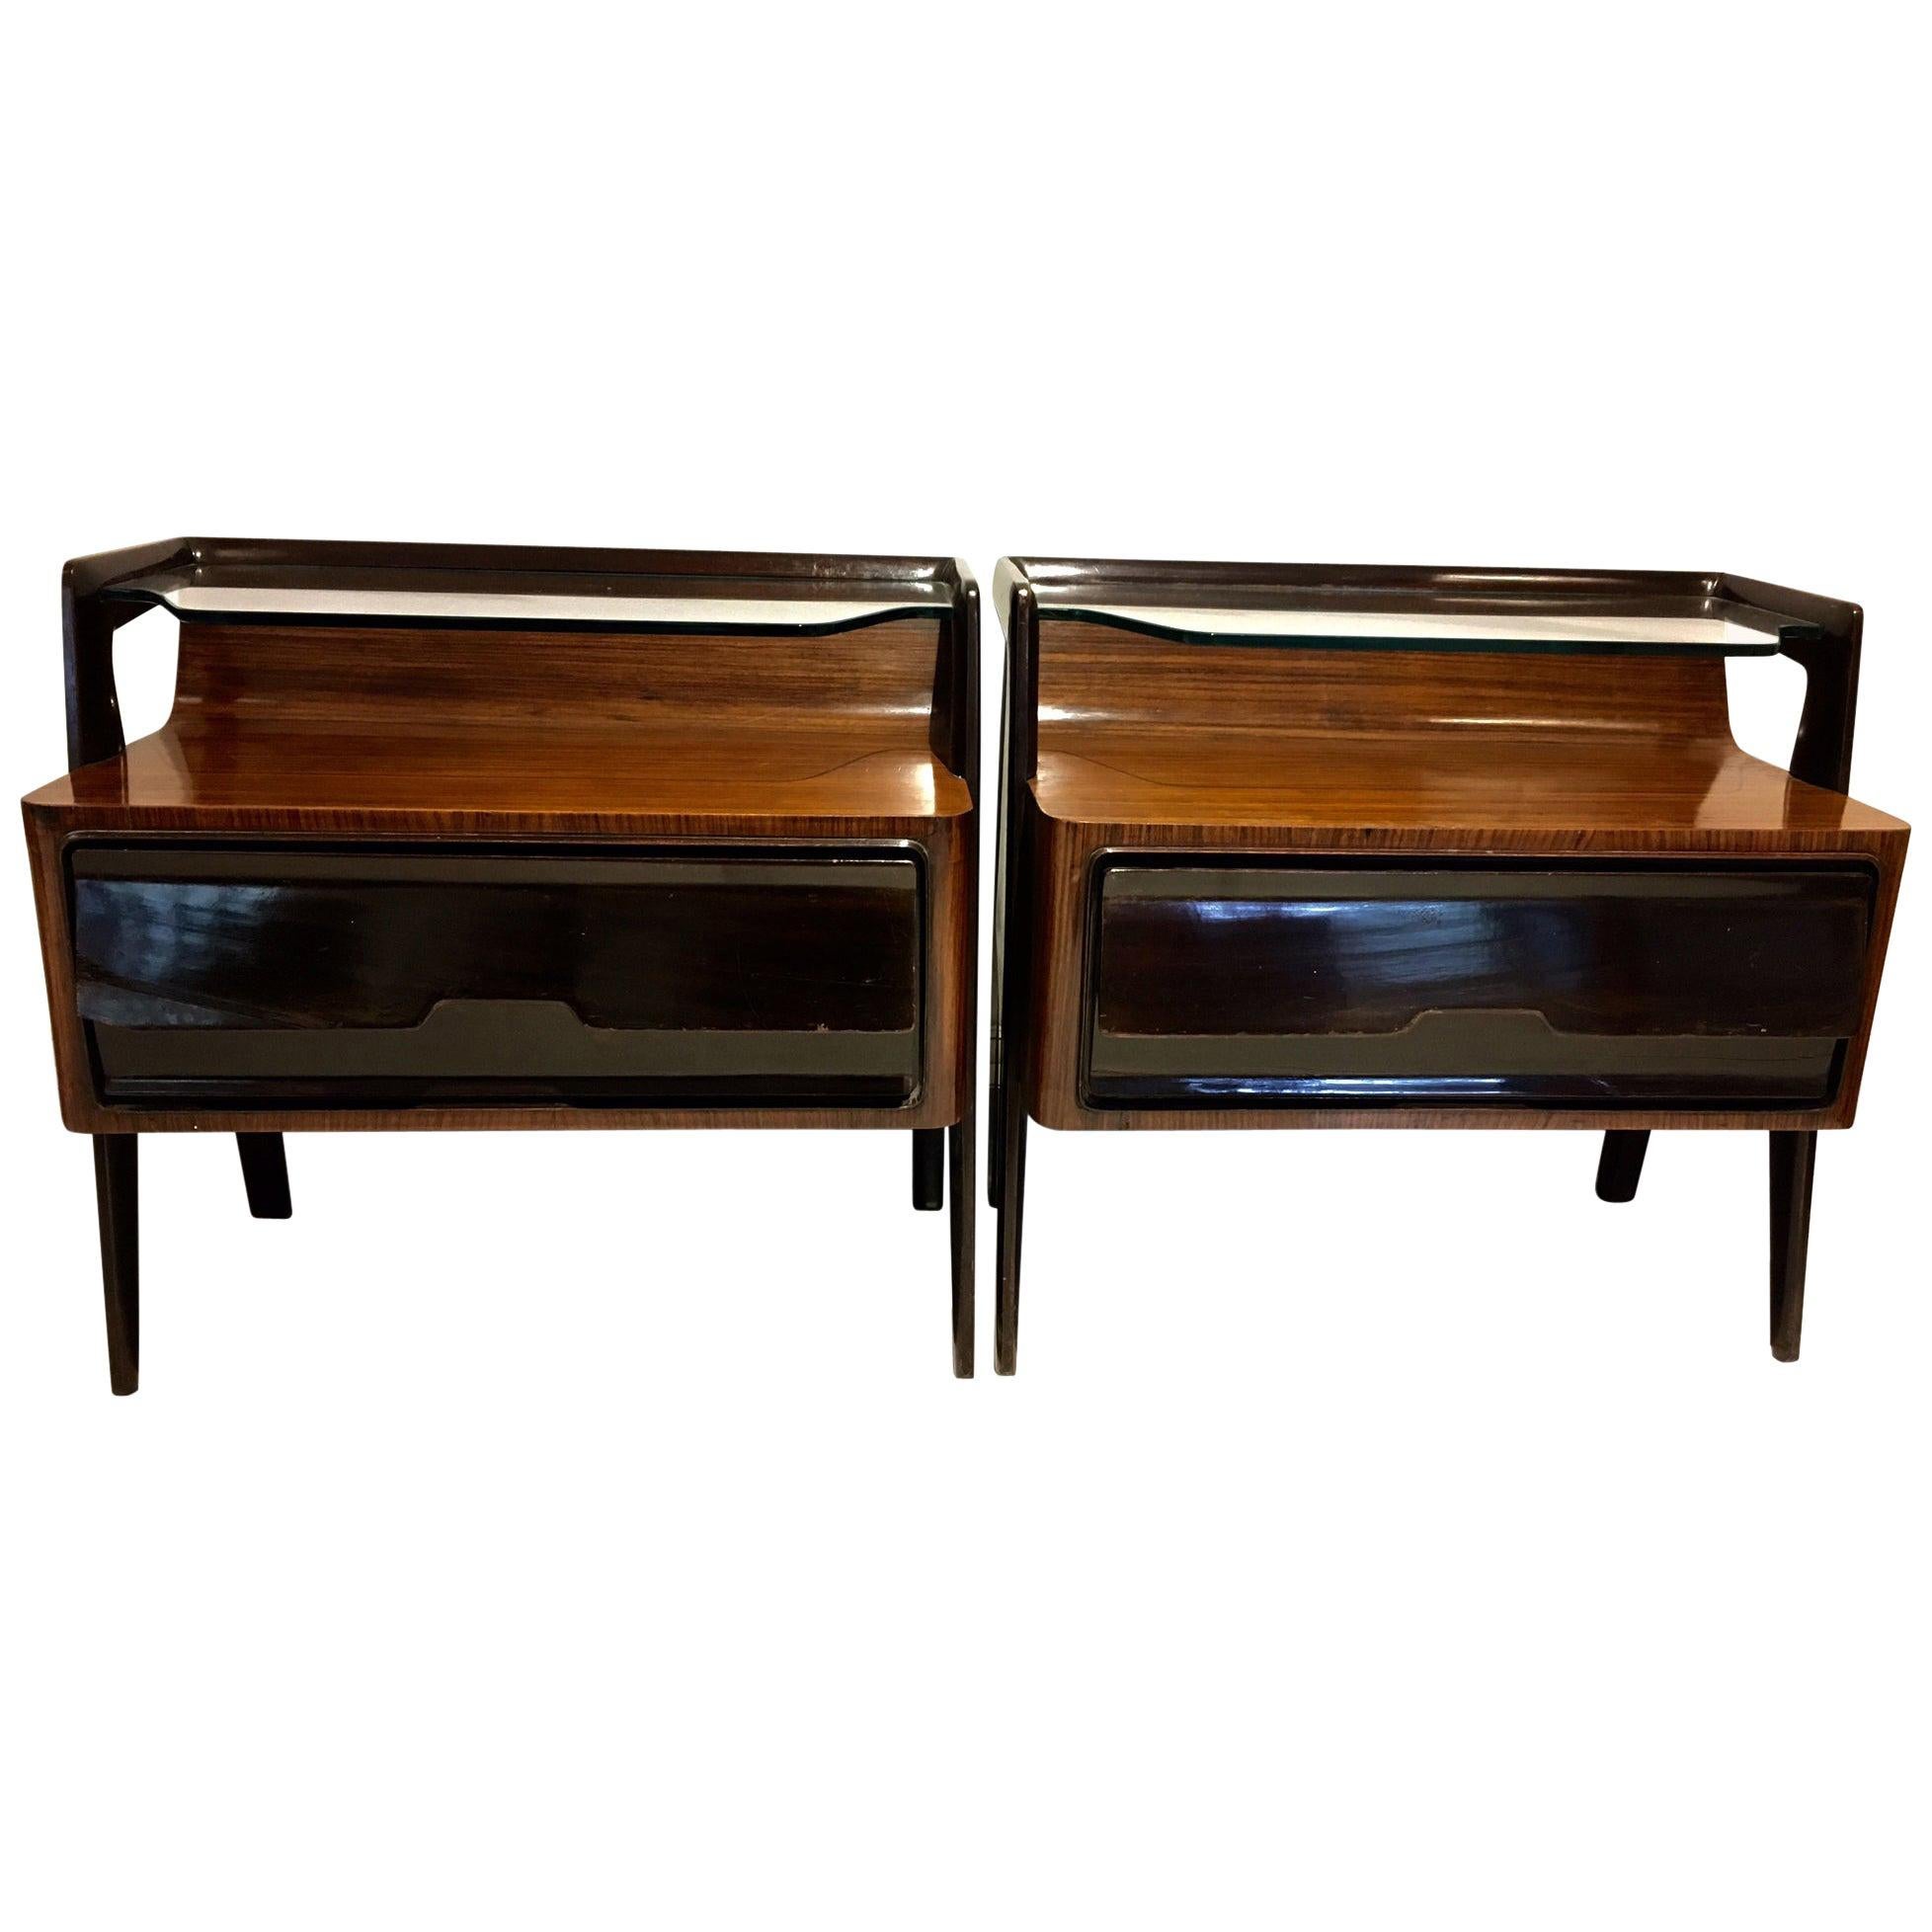 Pair of Lacquered Wood Side Tables Attributed to Paolo Buffa